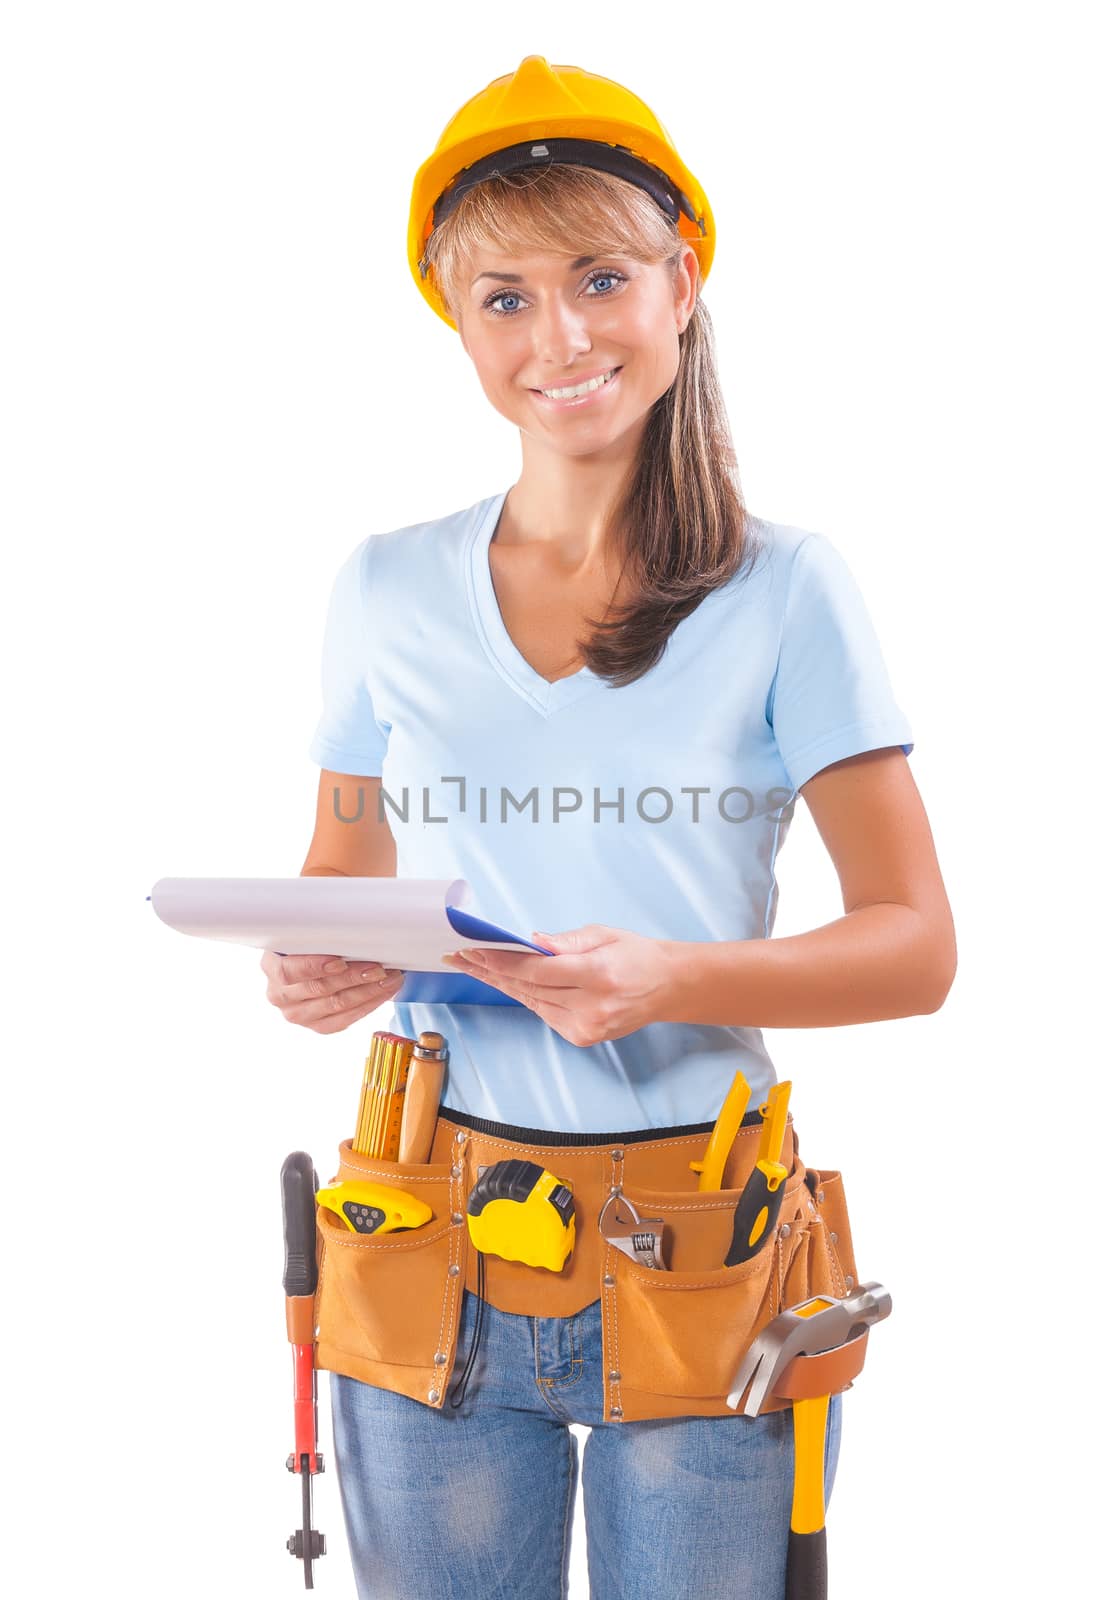 Female Worker With Clipboard On White Background by mihalec